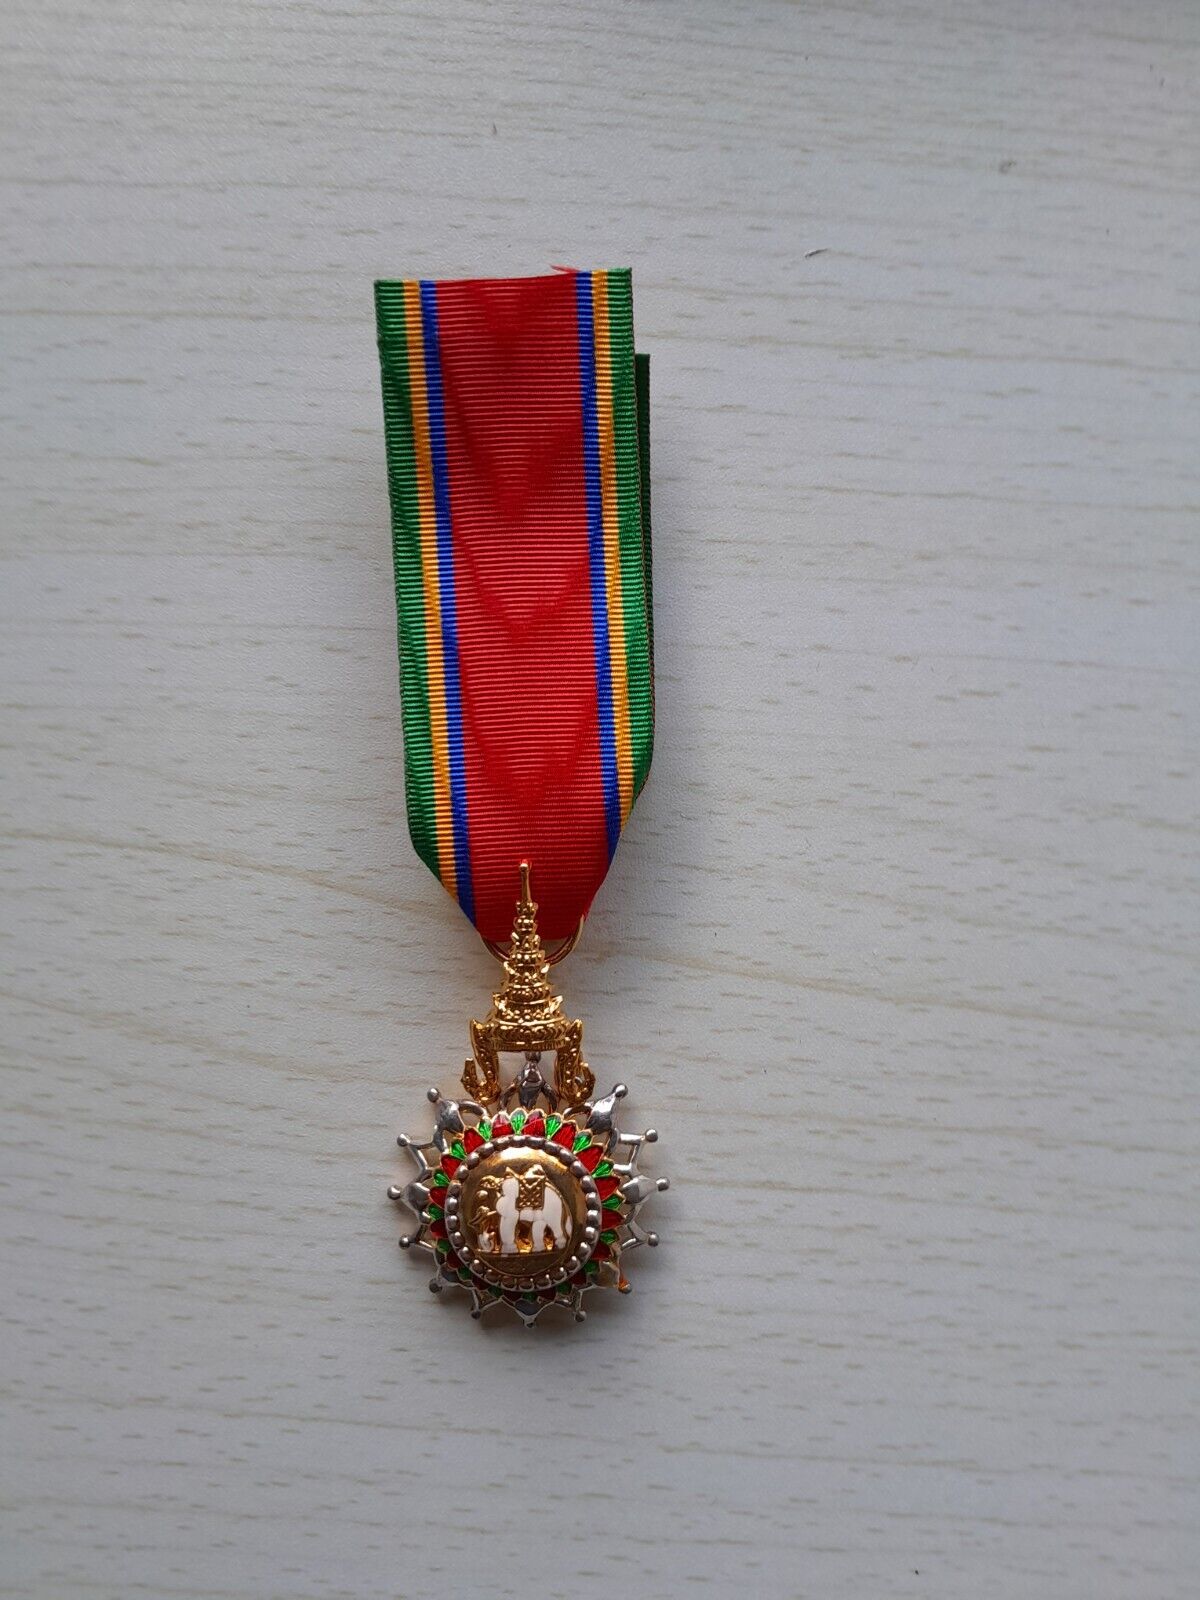 THAILAND ORDER OF THE WHITE ELEPHANT-5TH CLASS, MEMBER, MINIATURE MEDAL